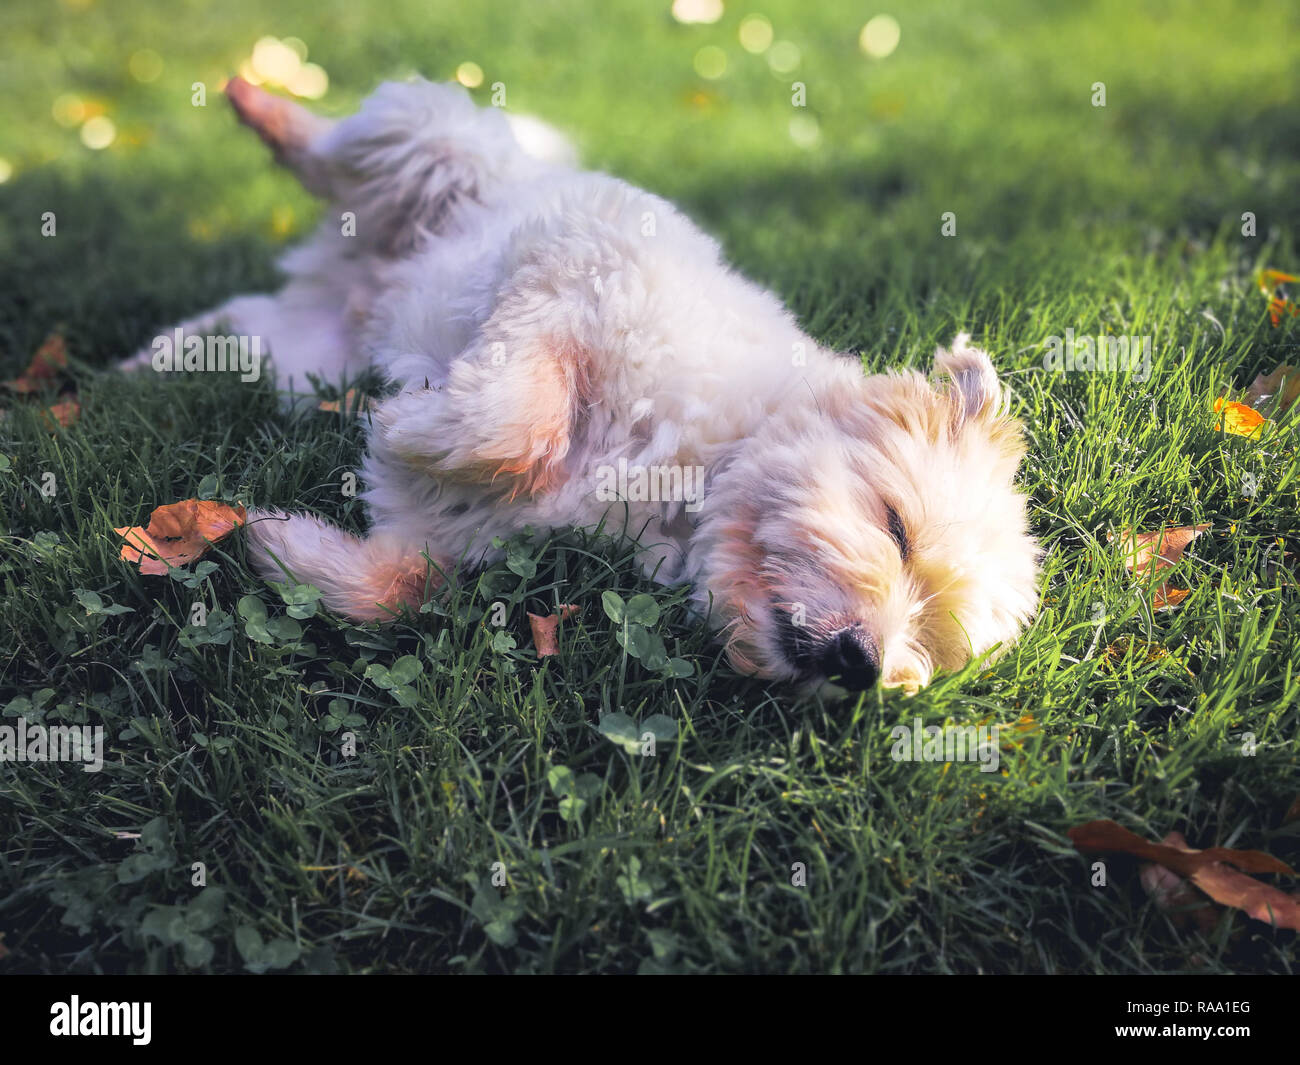 Cute sweet furry dog lying on a grass in a city park Stock Photo